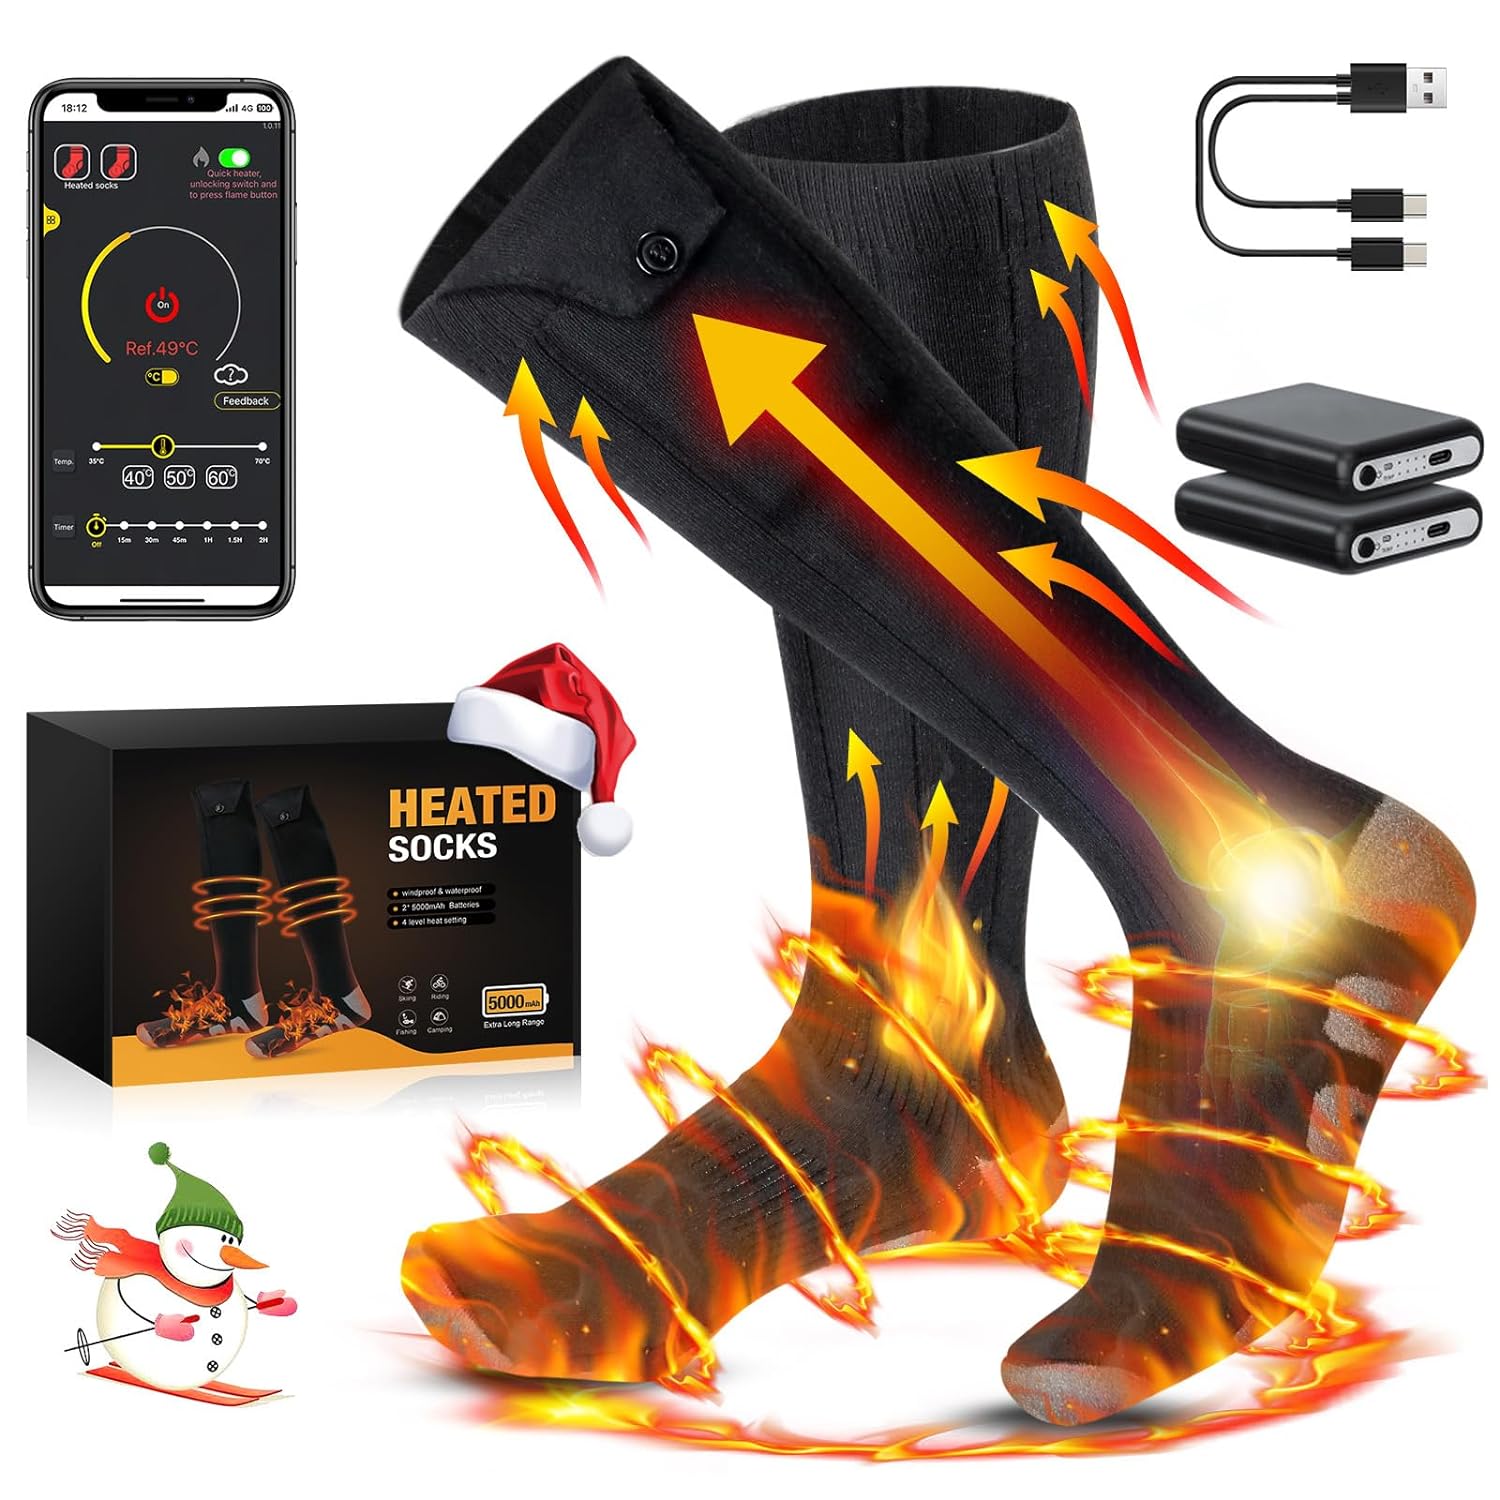 Heated Socks for Men Women, 5000mAH Rechargeable Washable Electric Socks with App Control, Battery Powered Warming Socks with 4 Heat Settings, Thermal Foot Warmer Socks for Hunting Hiking Ski Camping